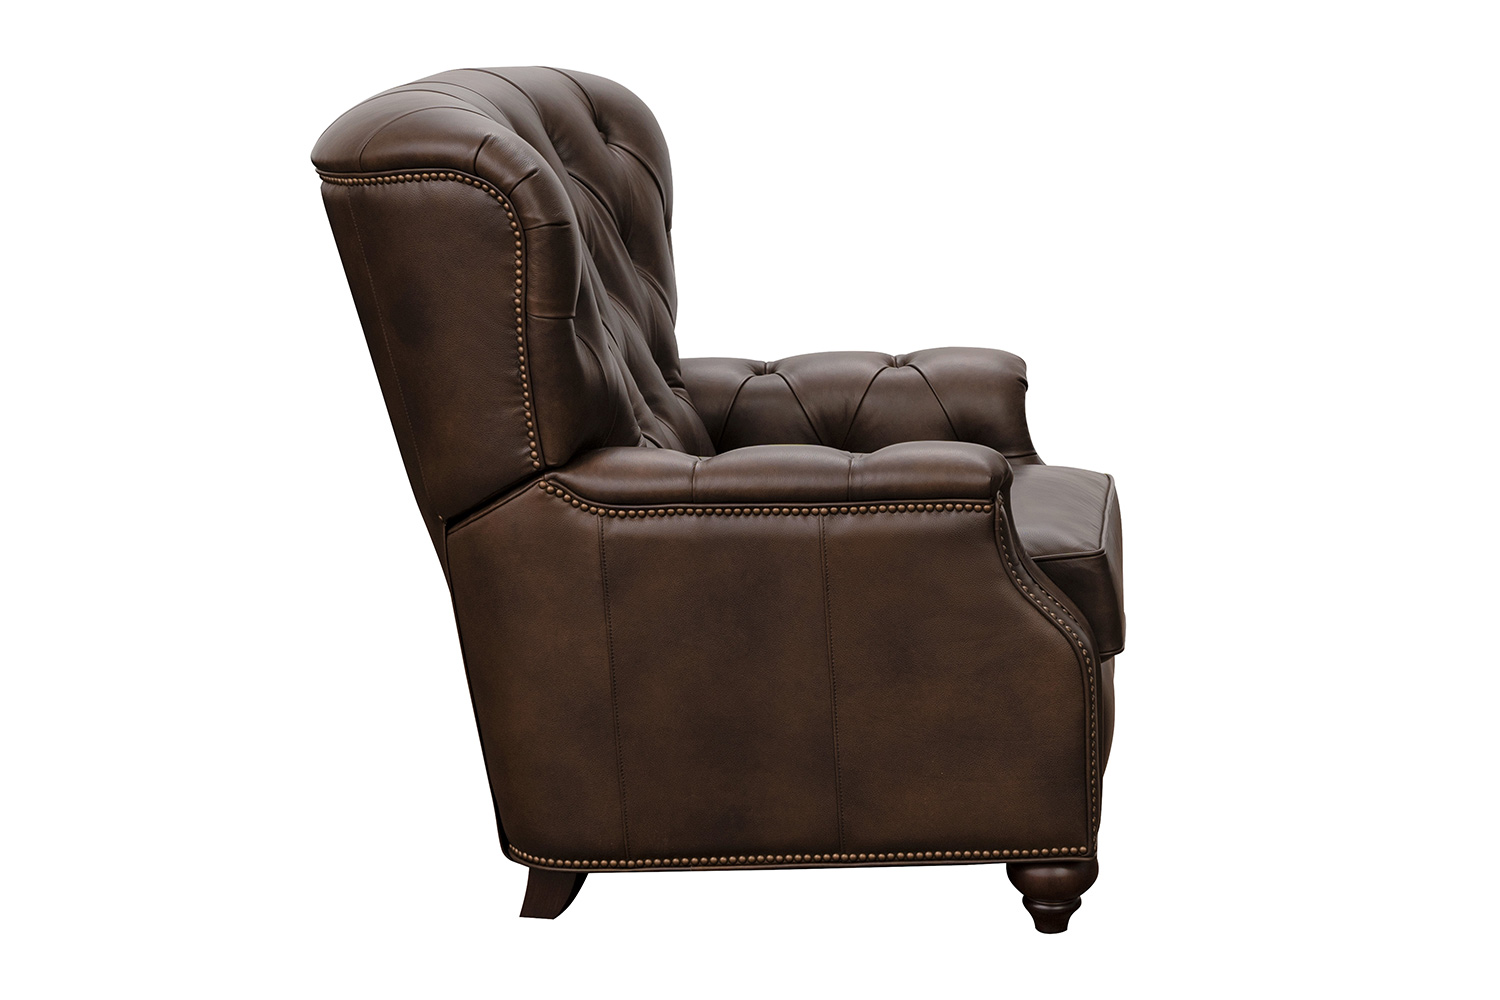 Barcalounger Lombard Recliner Chair - Ashford Walnut/All Leather